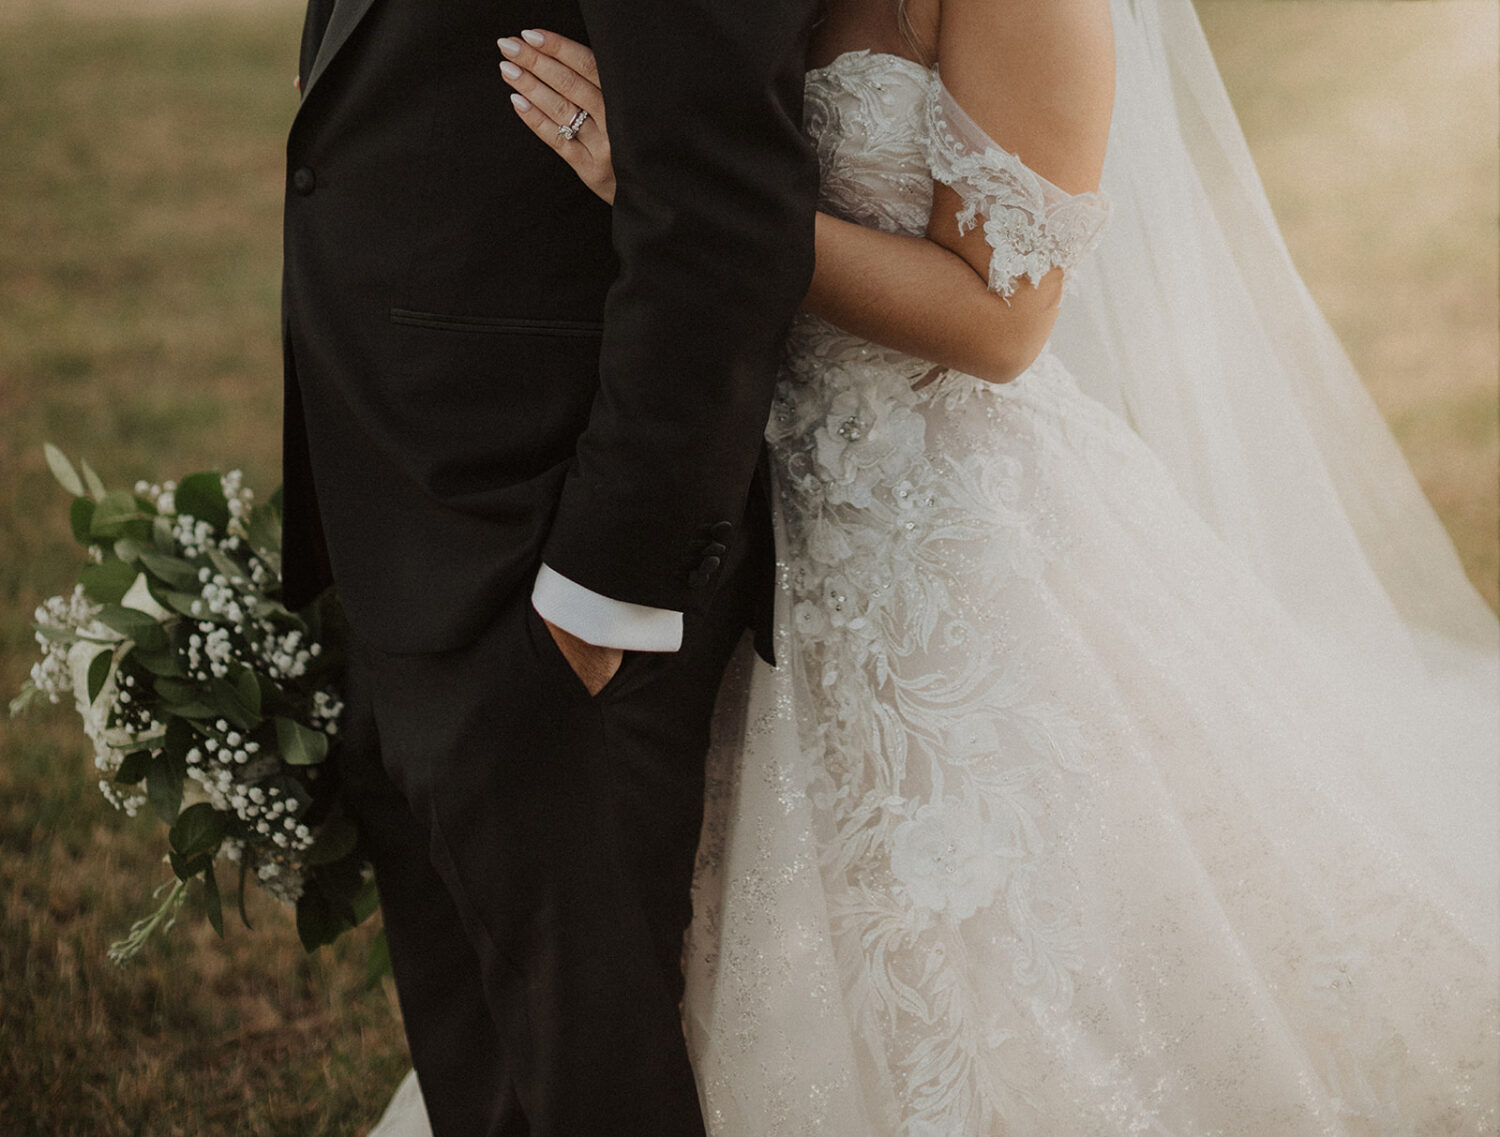 bride holds groom from behind at outdoor field wedding